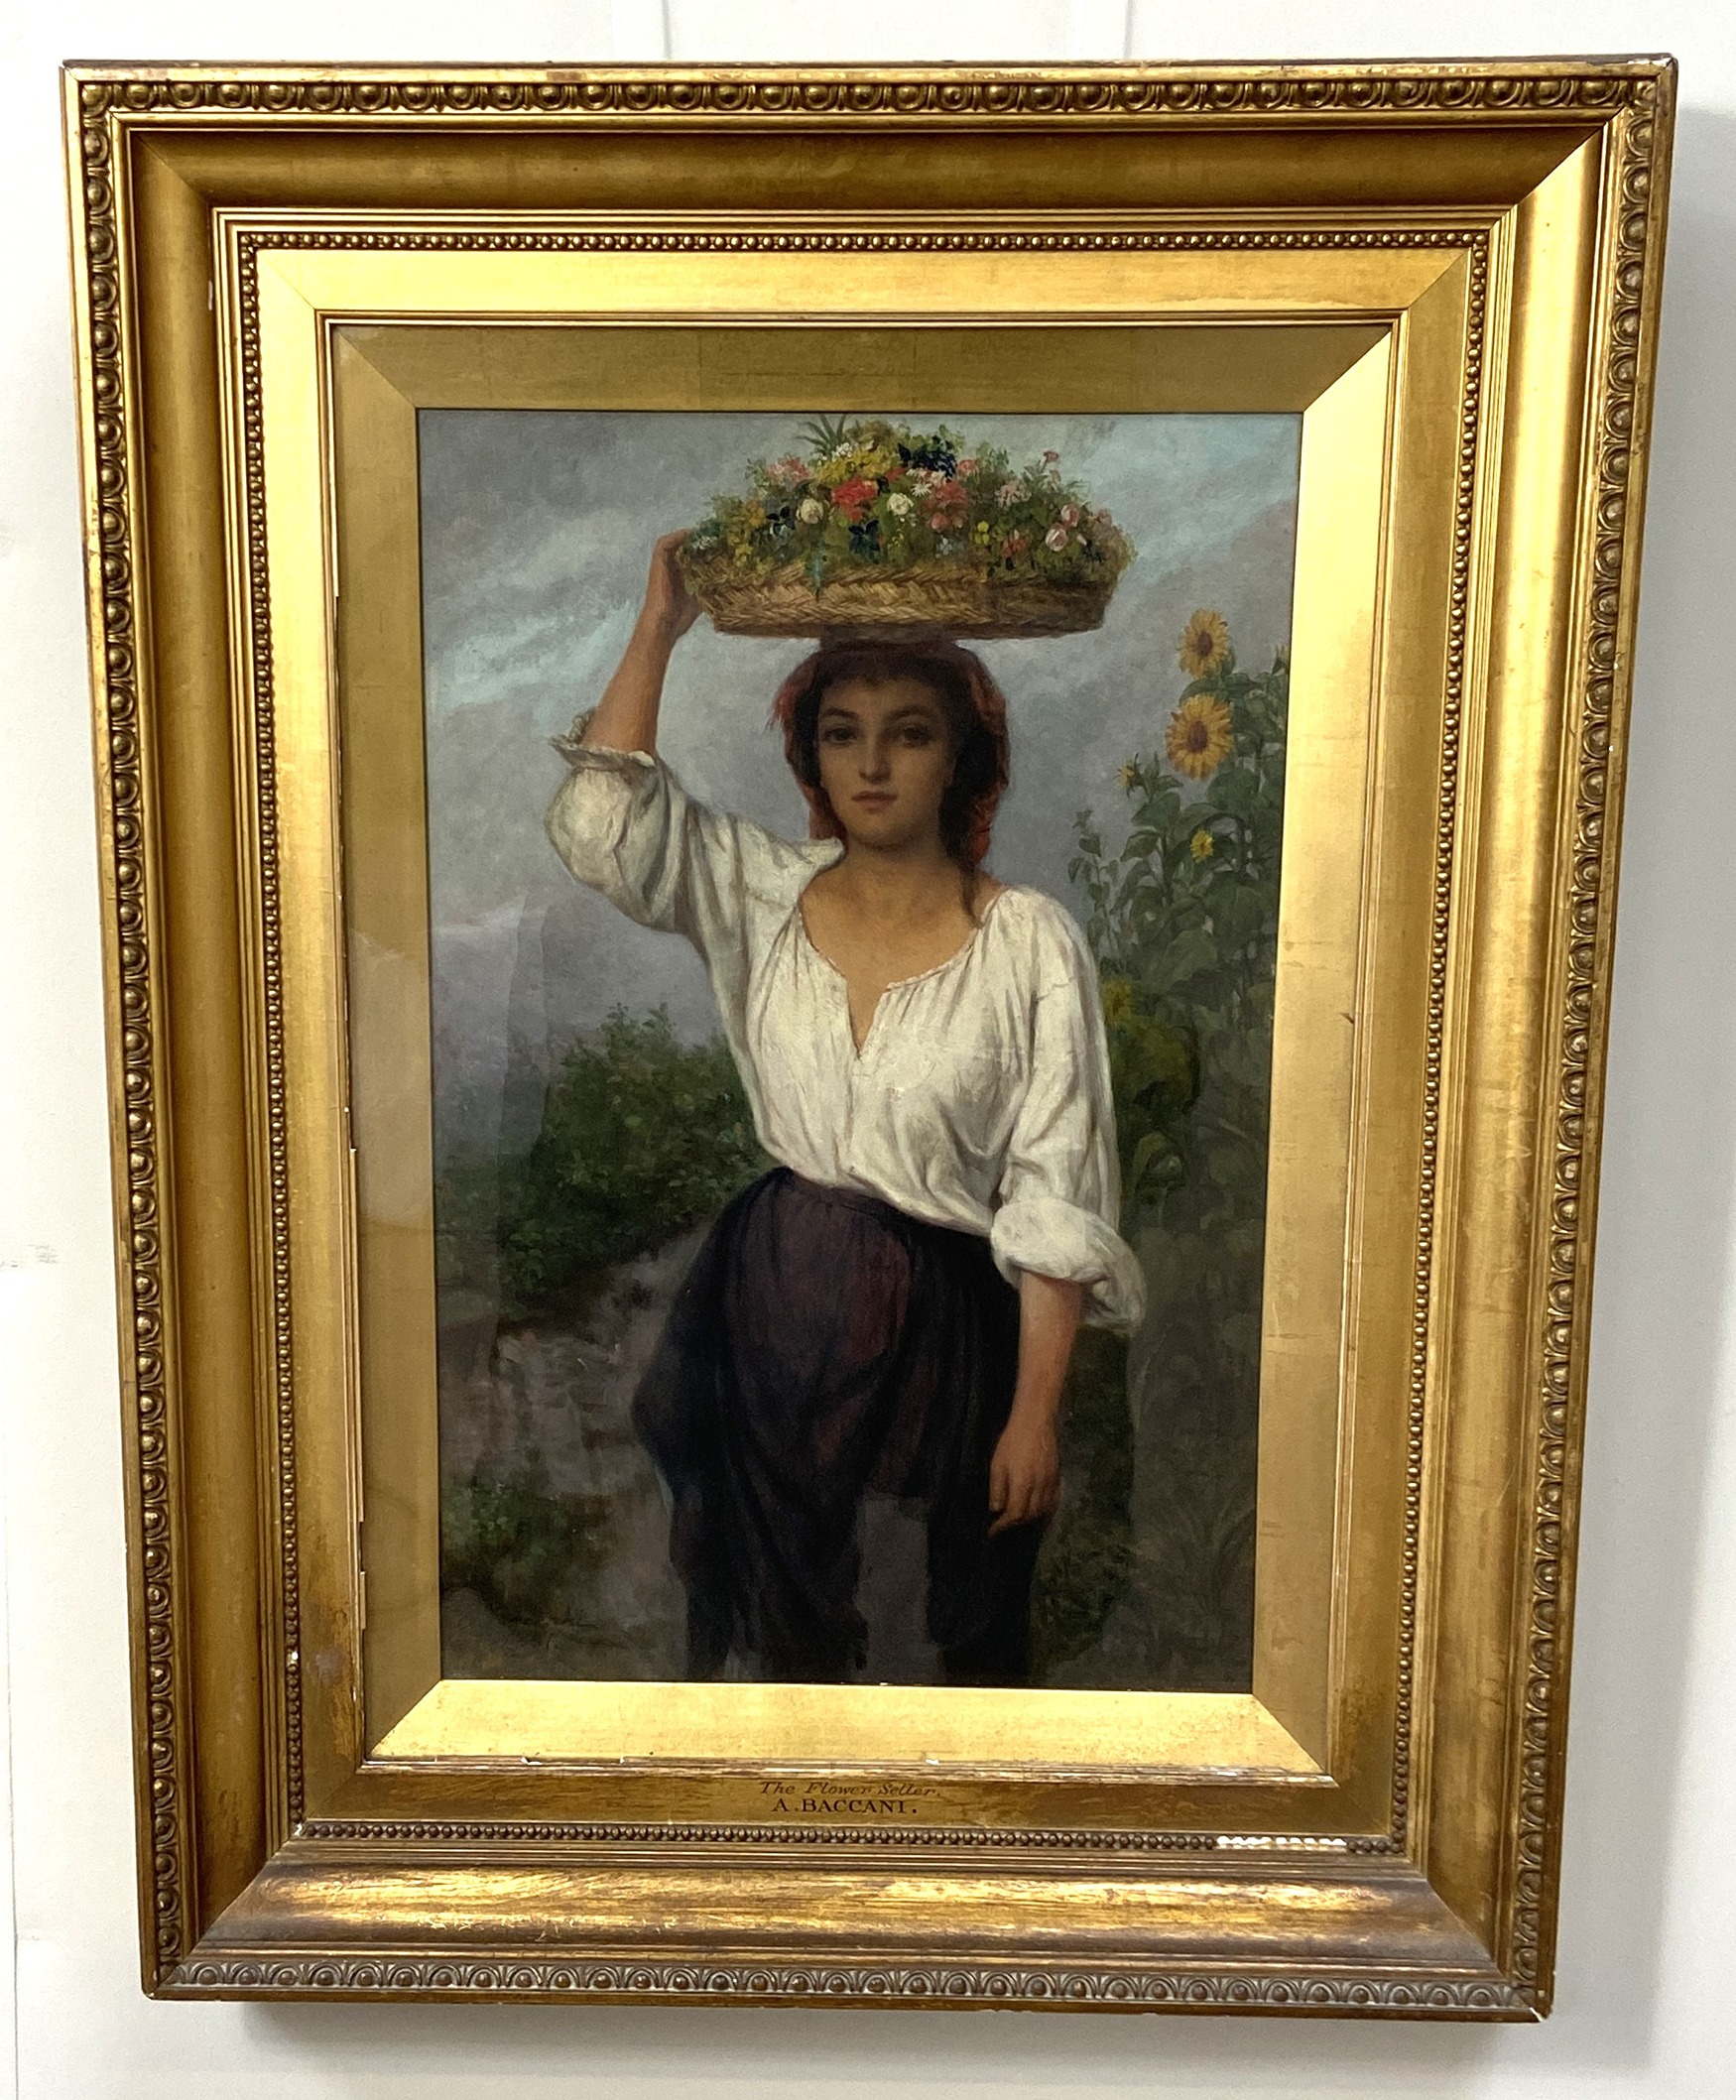 ATTILIO BACCANI, Italian (act.1844-1889), The Flower Seller,  oil on panel, signed and dated lower - Image 3 of 7